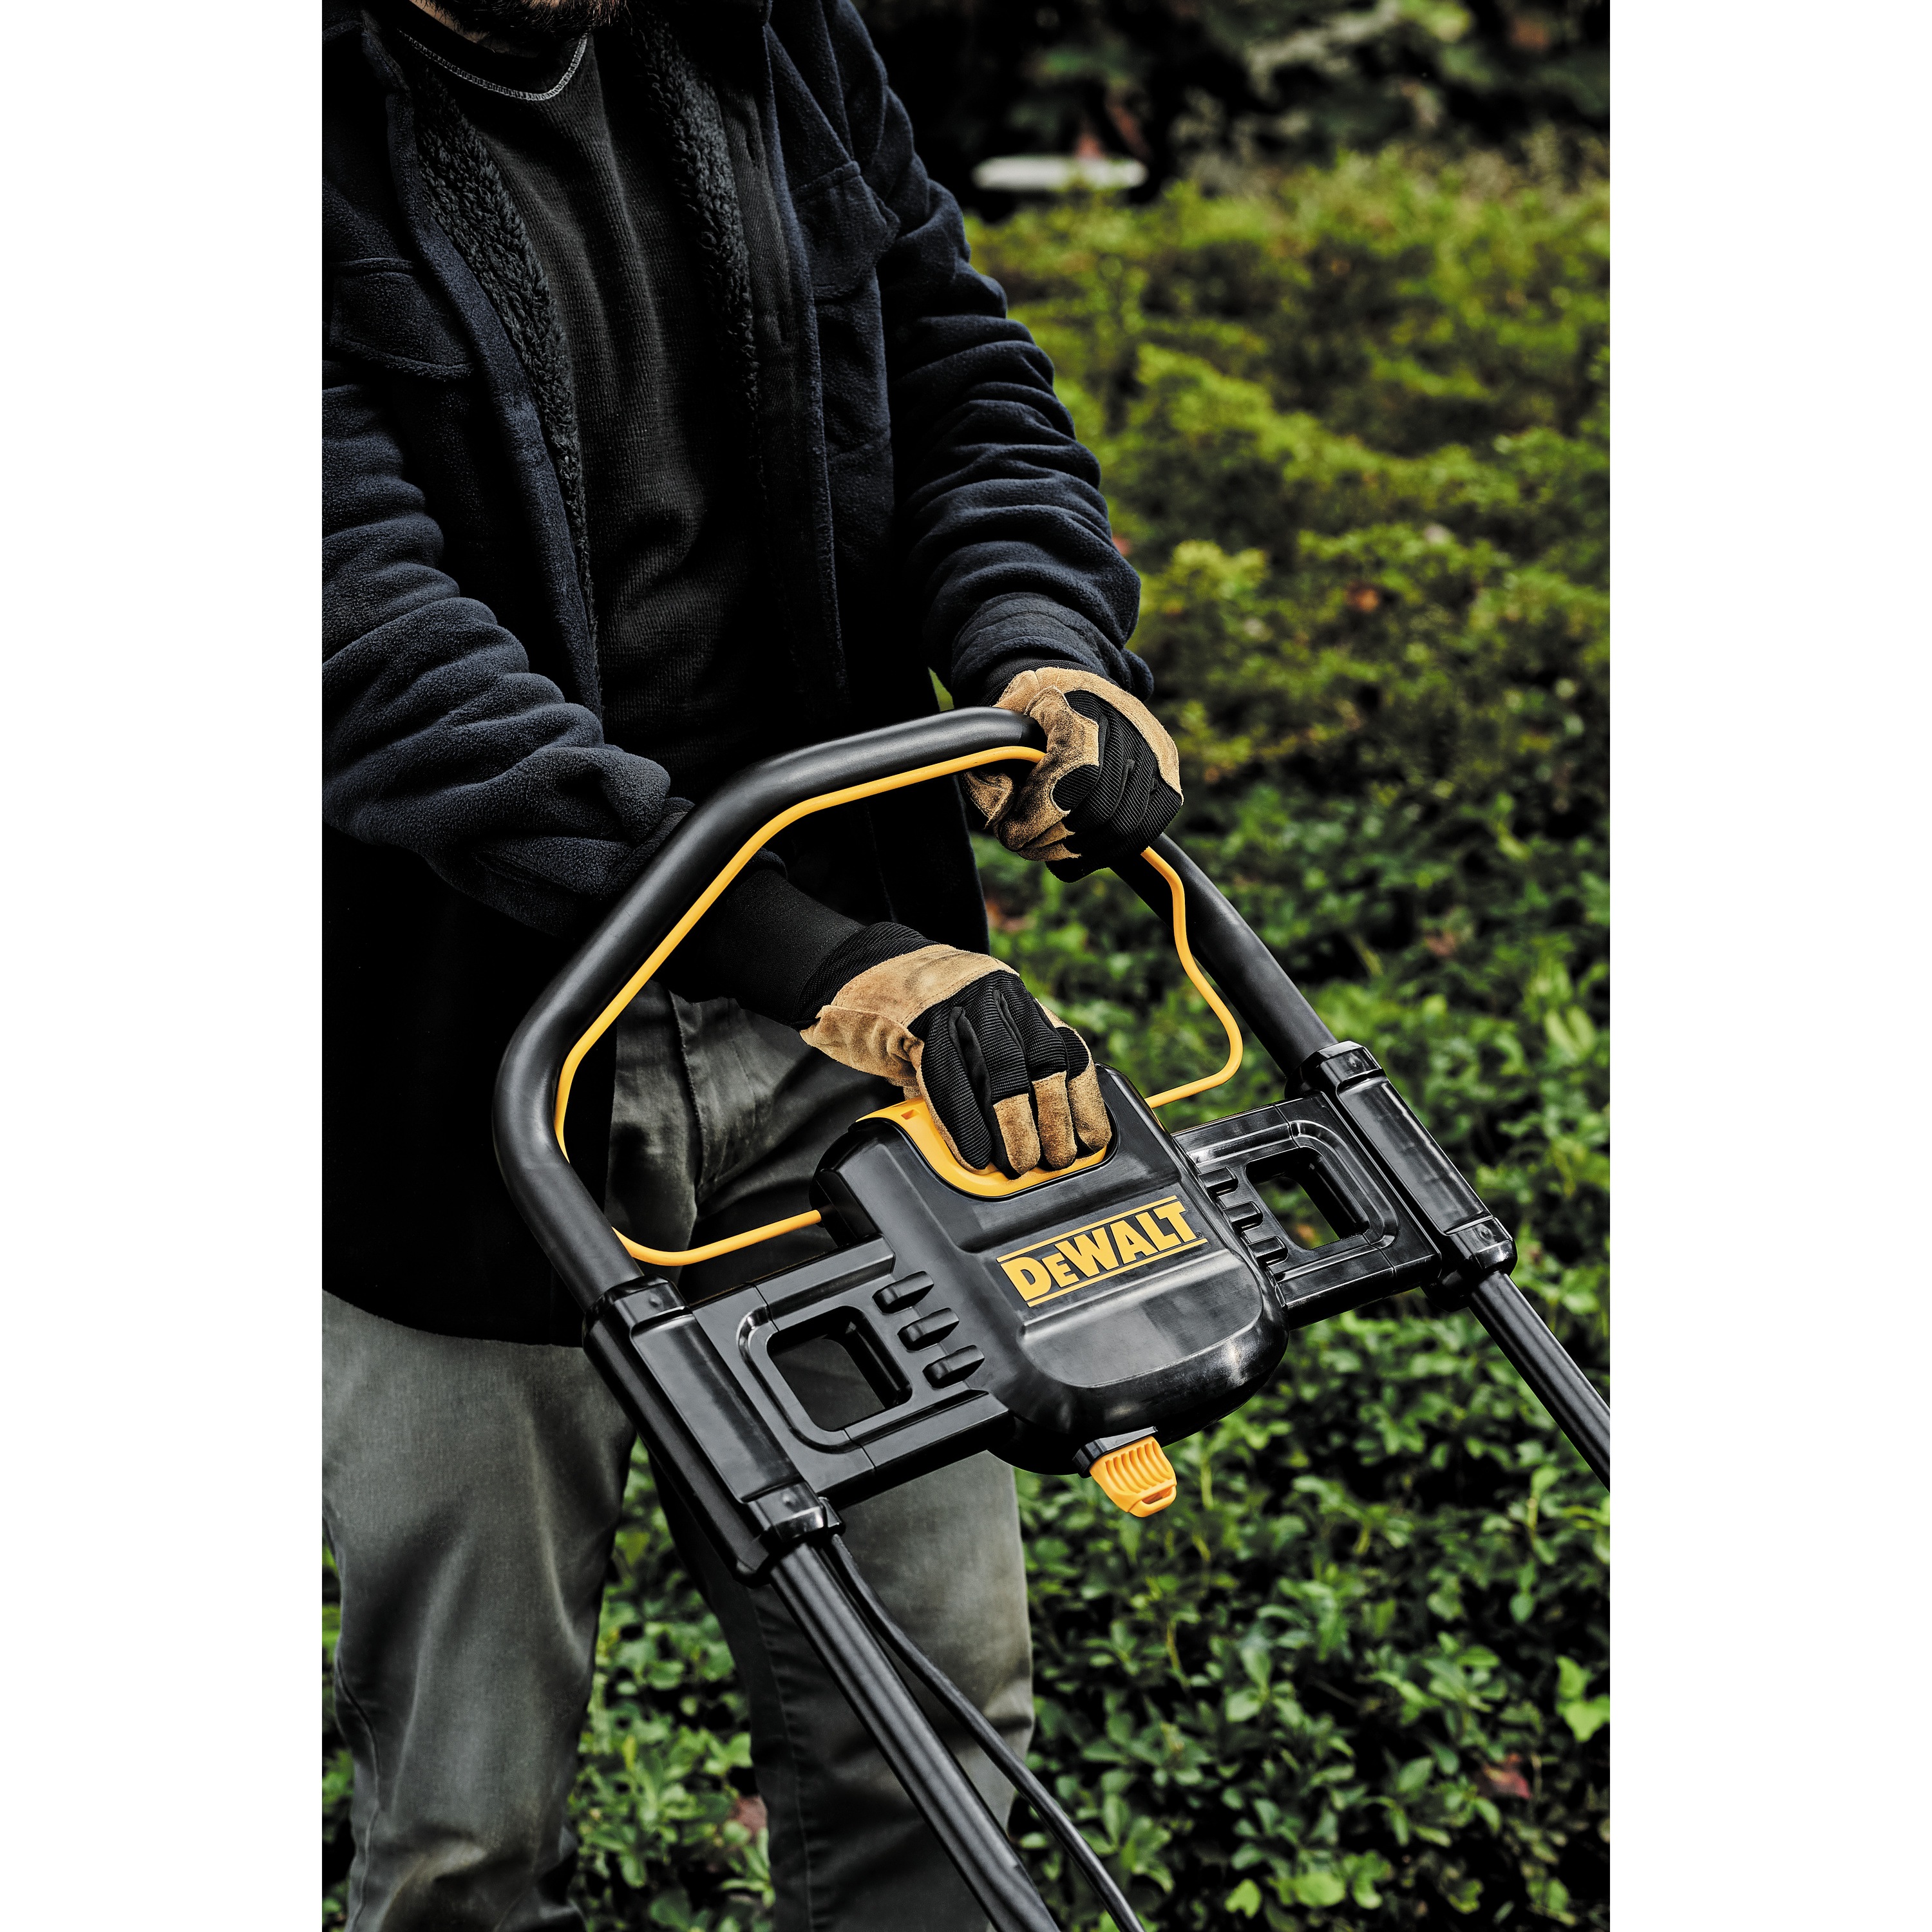 brushless cordless push mower being adjusted by a person